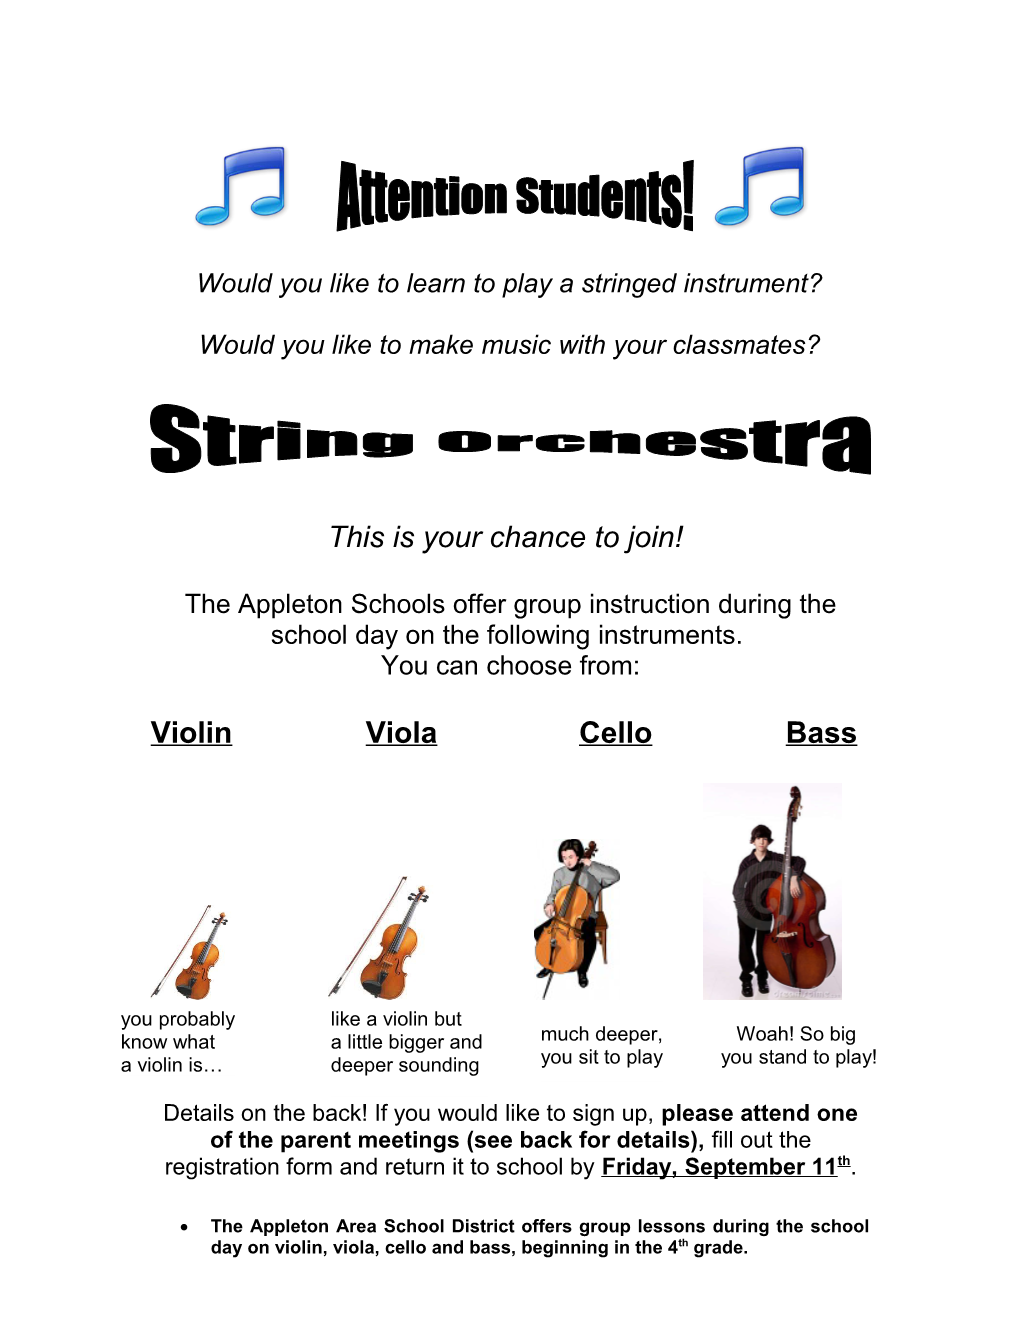 Would You Like to Learn to Play a Stringed Instrument?